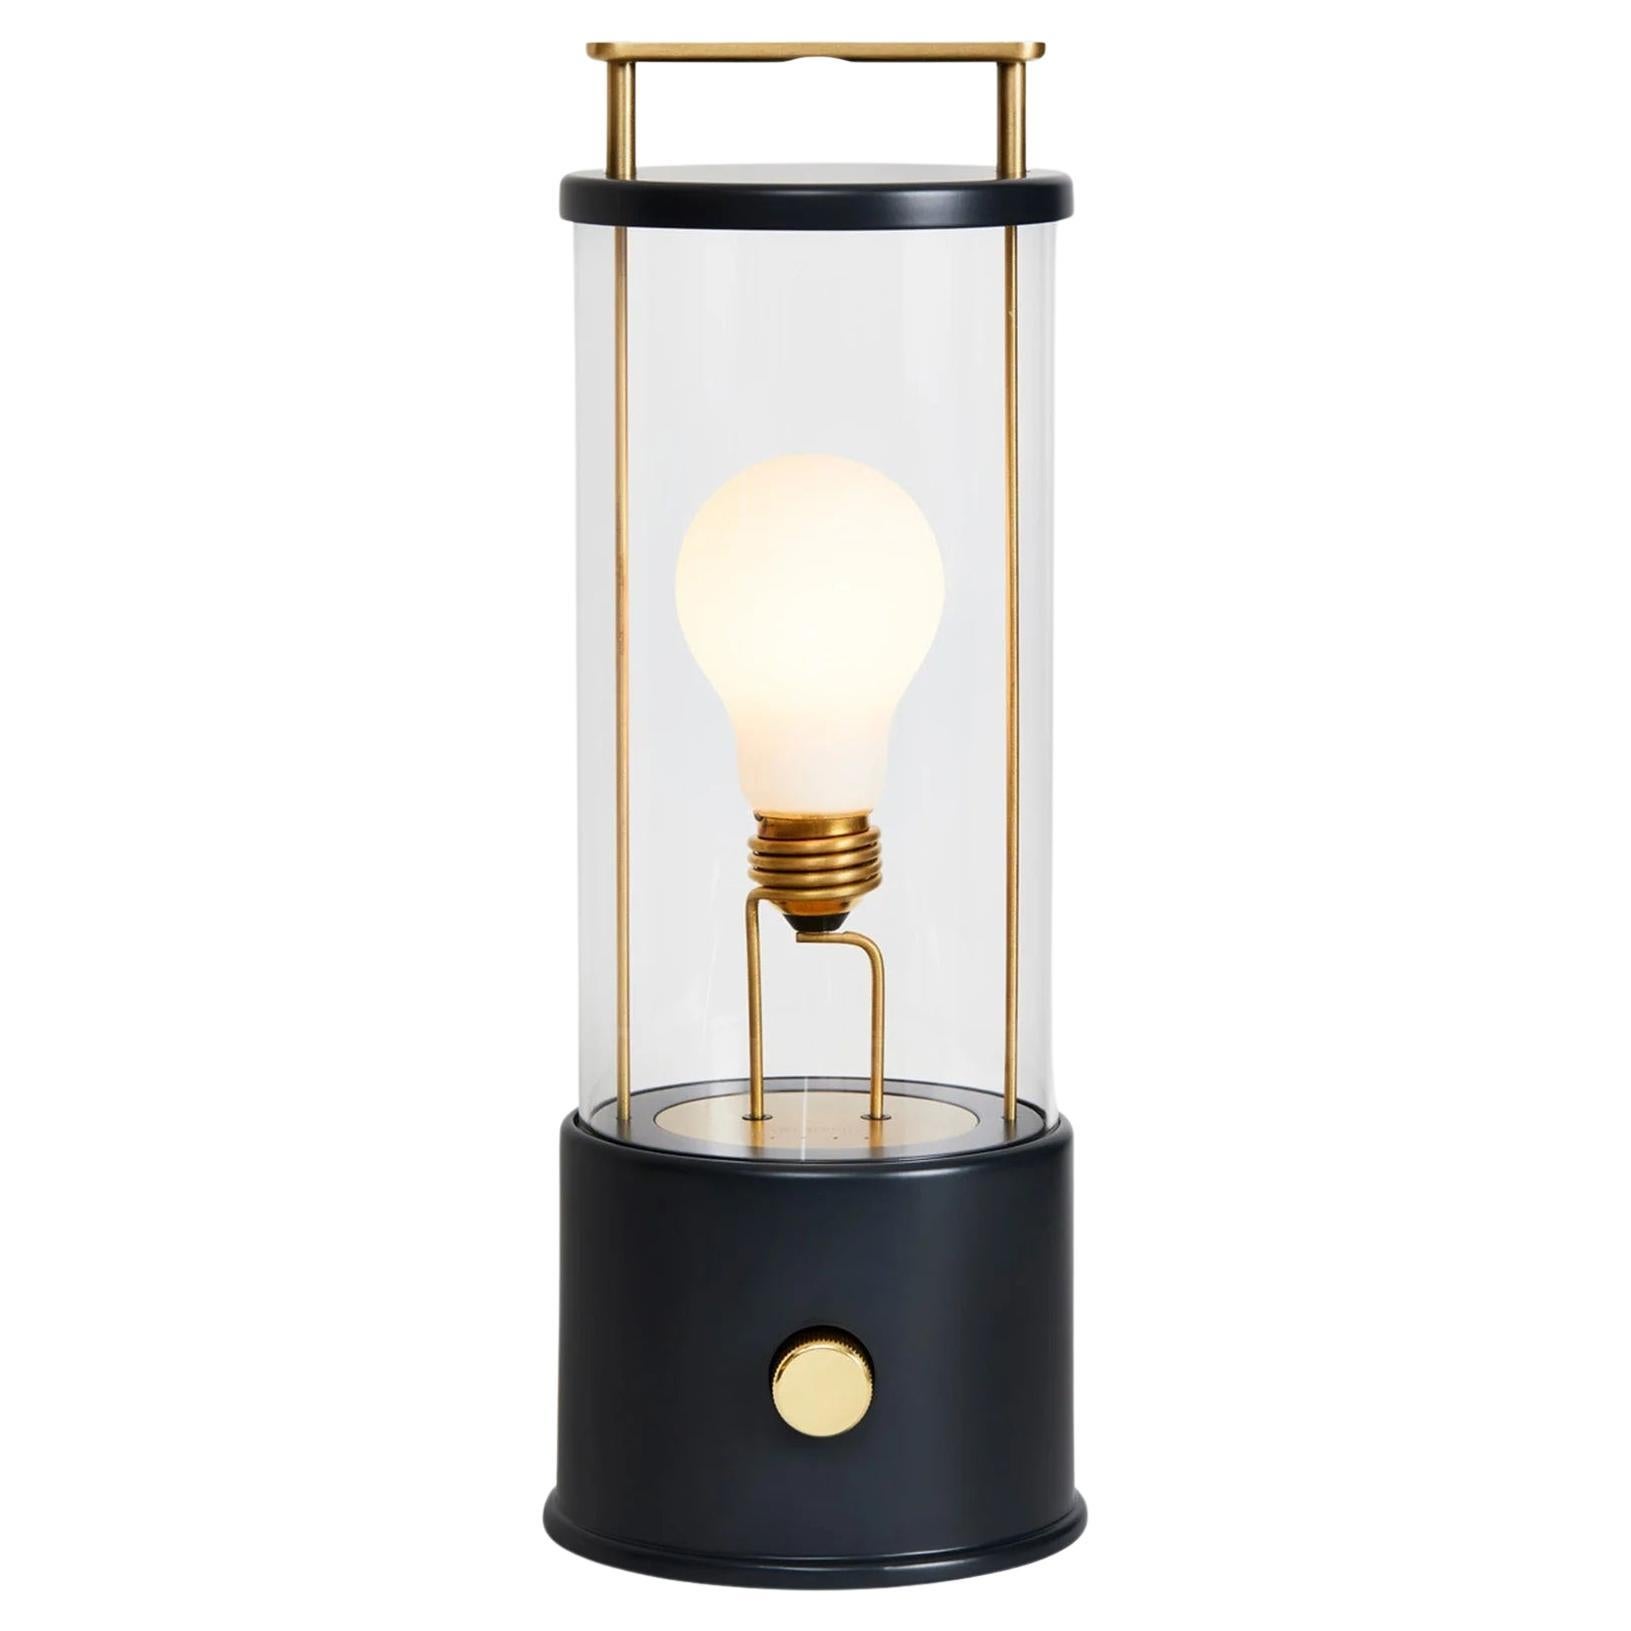 'The Muse' Portable Lamp by Farrow & Ball x Tala in Hackles Black For Sale